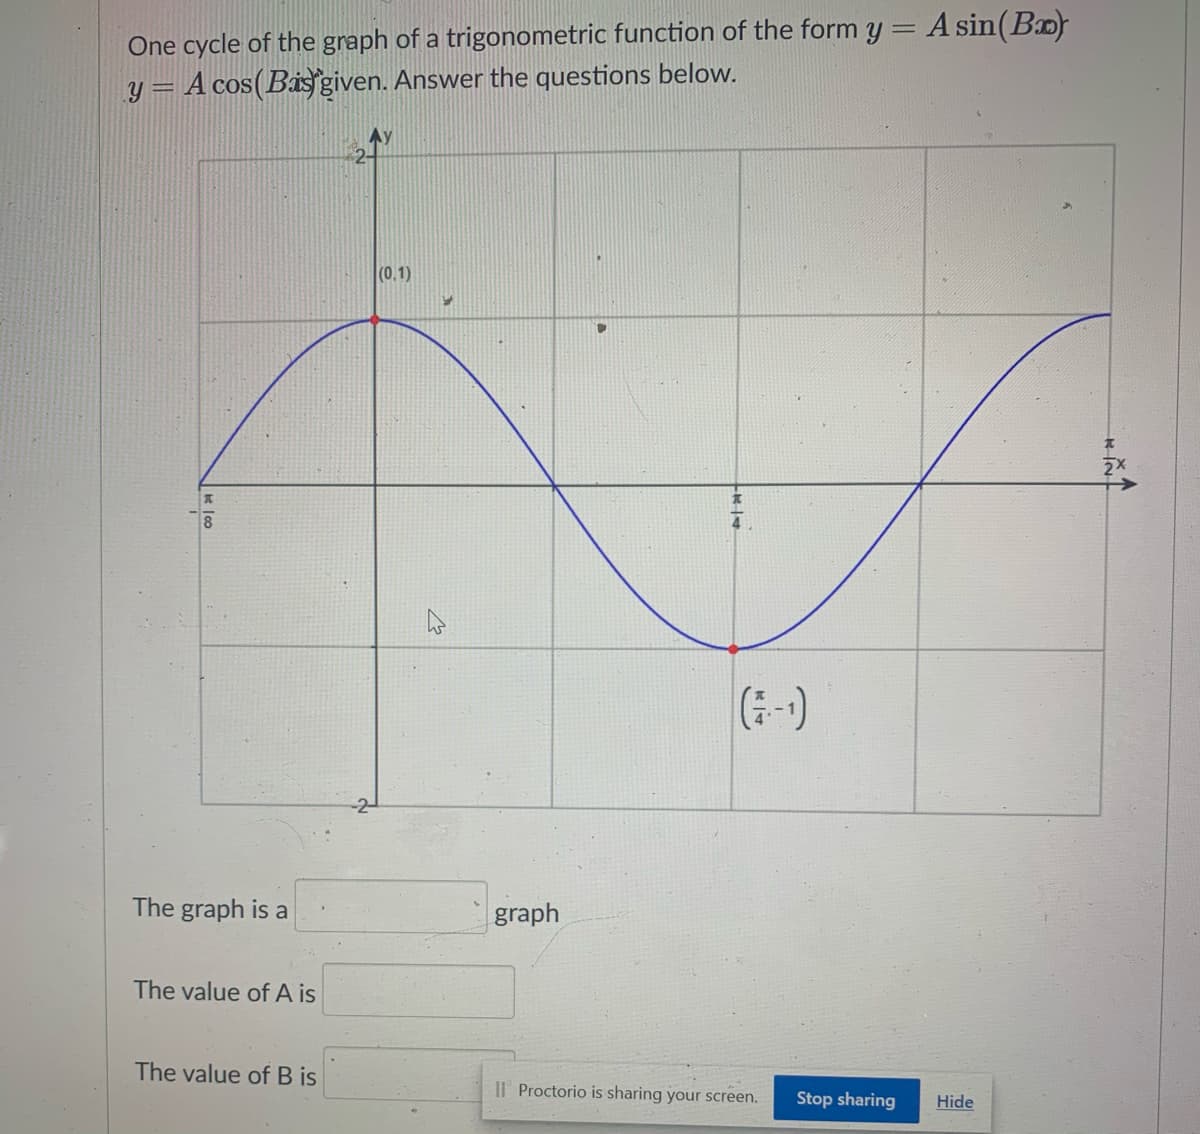 One cycle of the graph of a trigonometric function of the form y = A sin(B
y = A cos(Bis given. Answer the questions below.
(0.1)
(-)
The graph is a
graph
The value of A is
The value ofB is
Il Proctorio is sharing your screen.
Stop sharing
Hide
